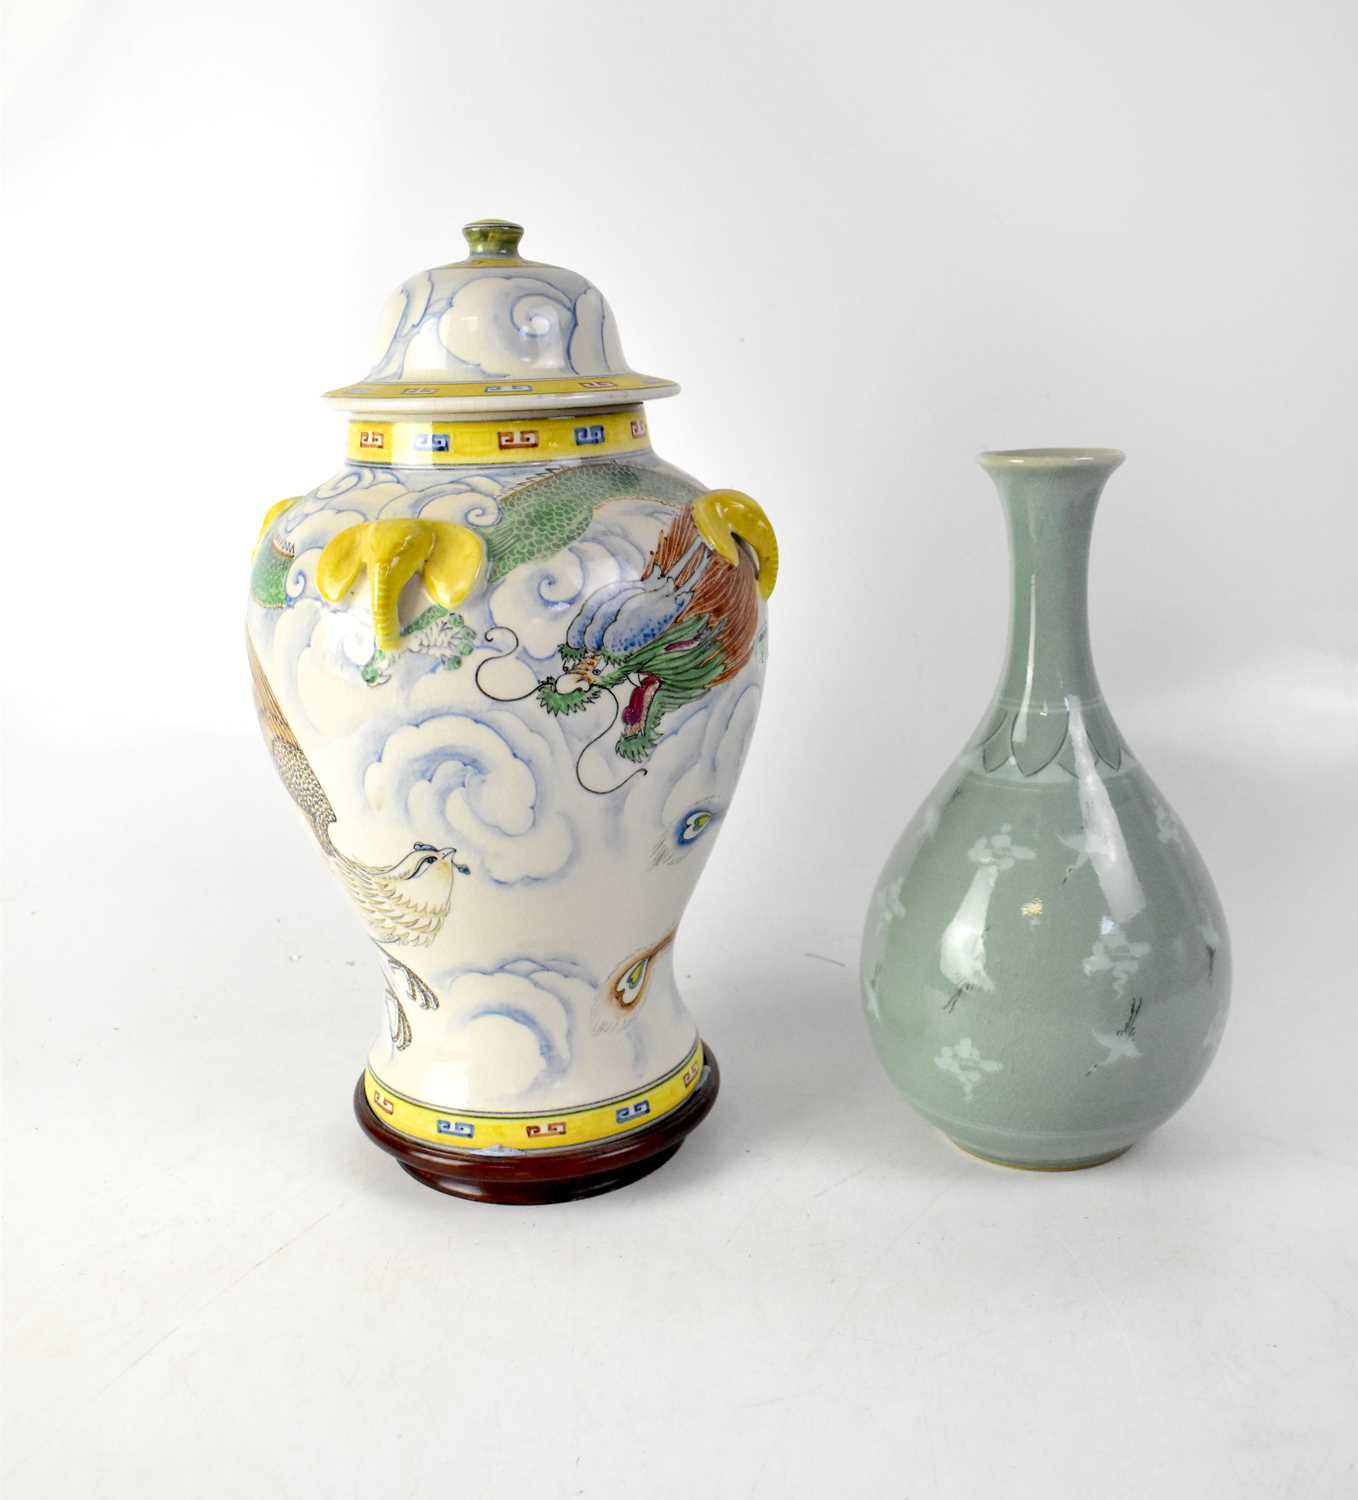 A celadon-style crackle glaze vase of onion form painted with cranes flying amongst clouds, with a